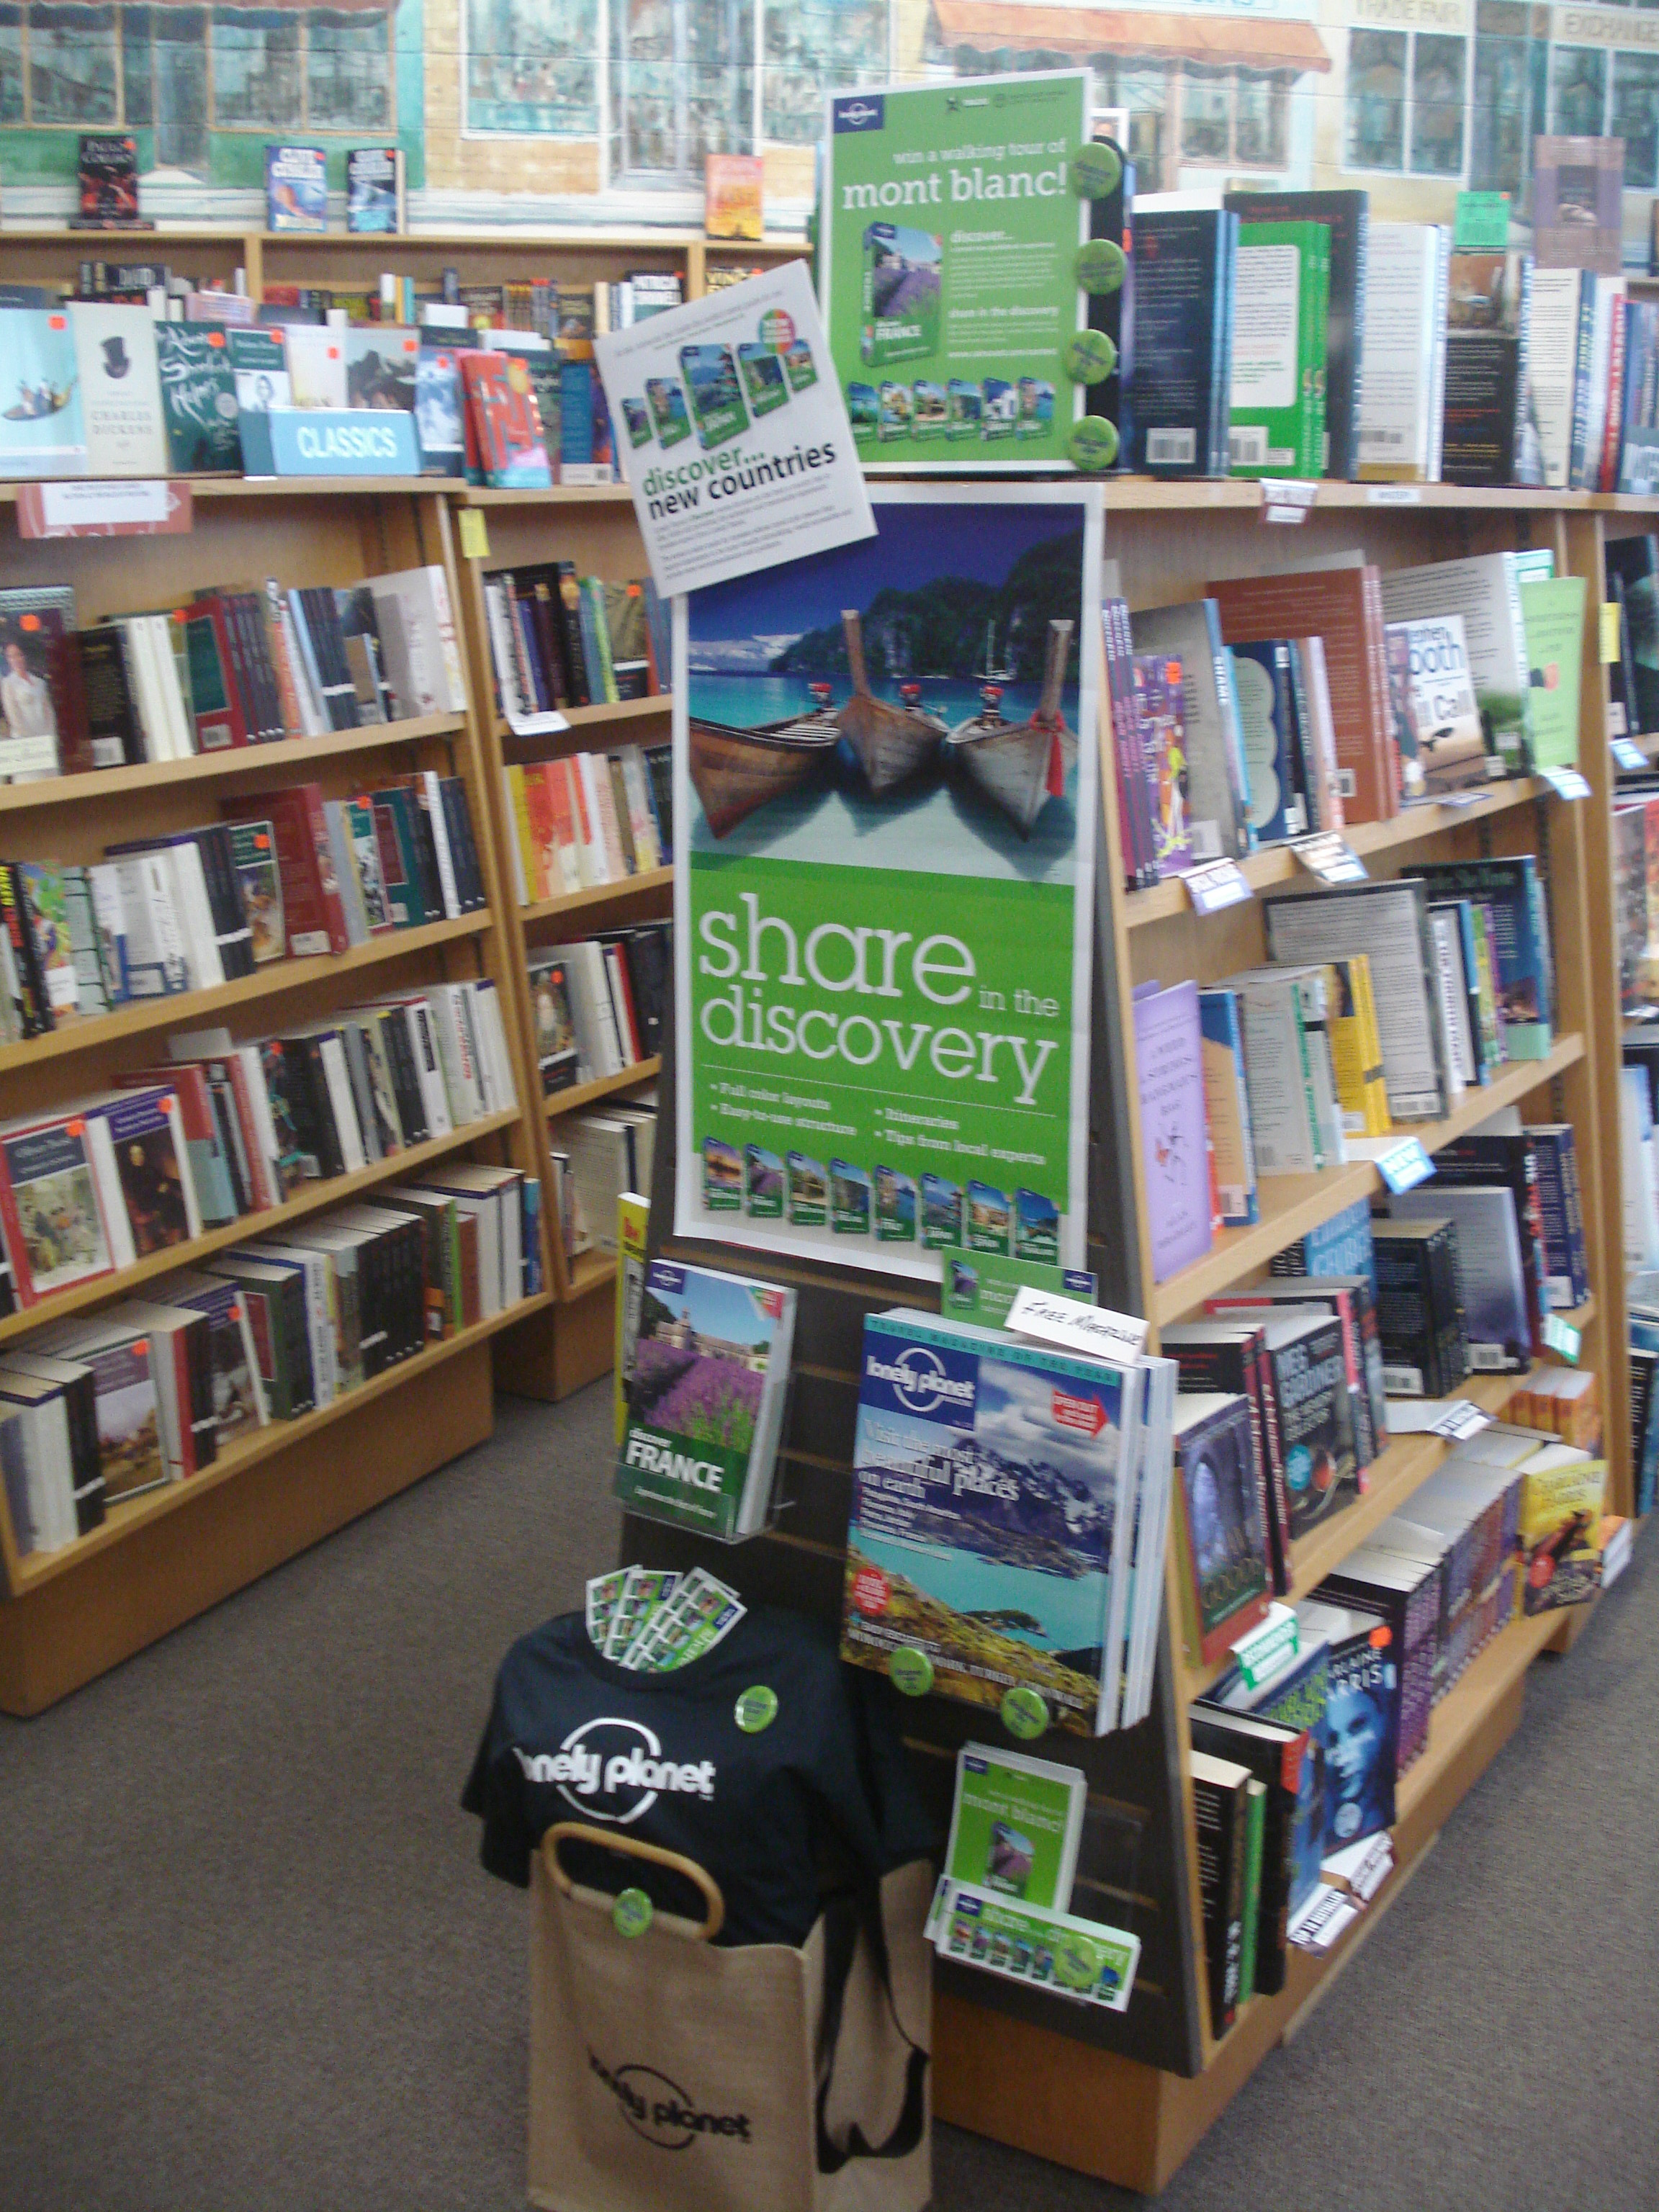 Black Bond Books' Lonely Planet Discover Display